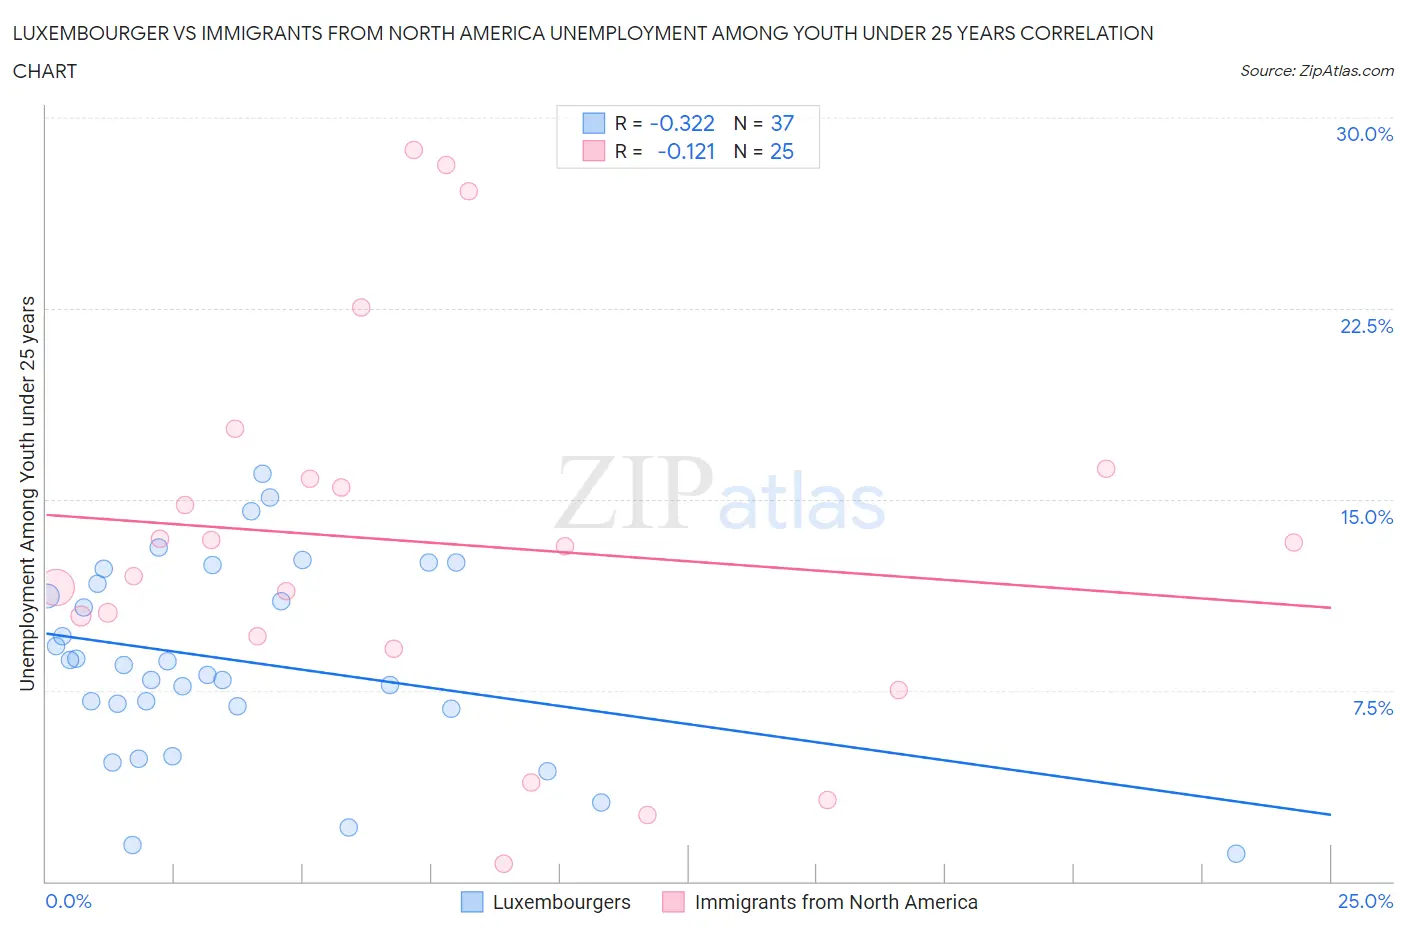 Luxembourger vs Immigrants from North America Unemployment Among Youth under 25 years